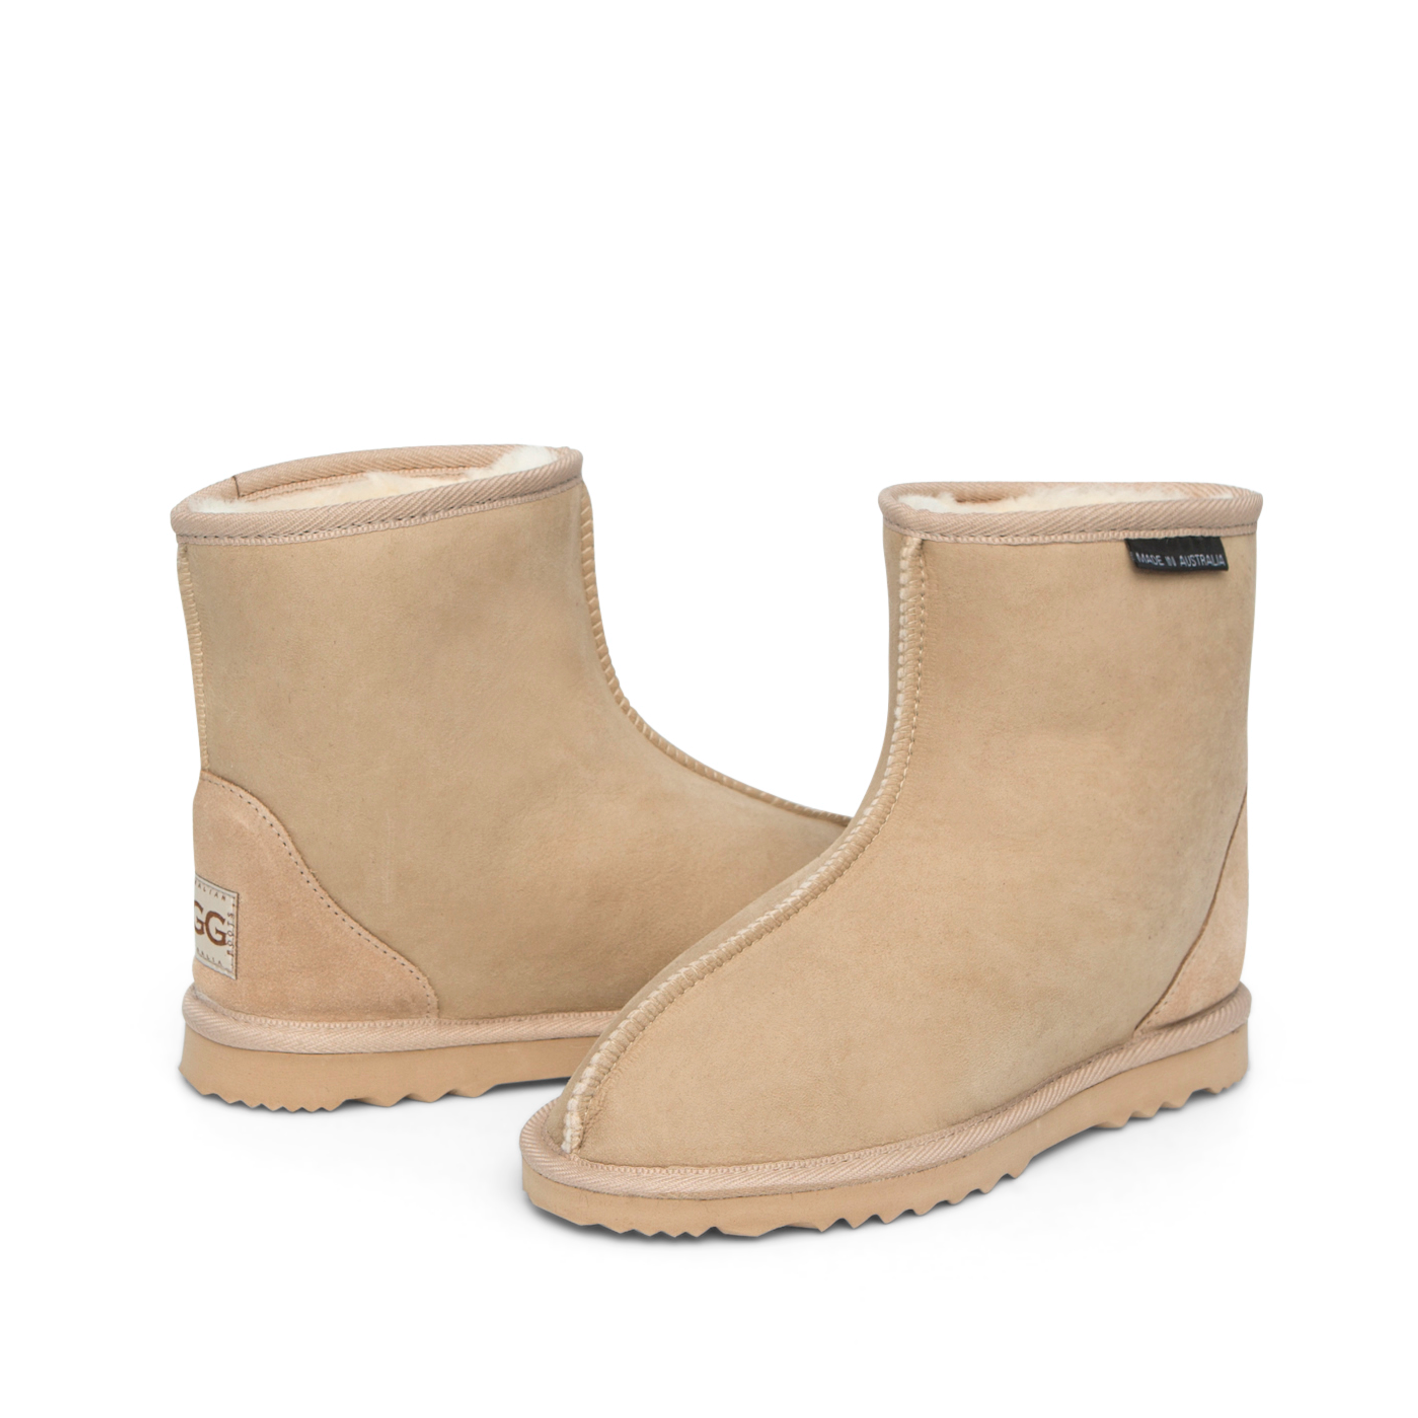 Men's Ankle Boots, seam in middle of front in sand colour